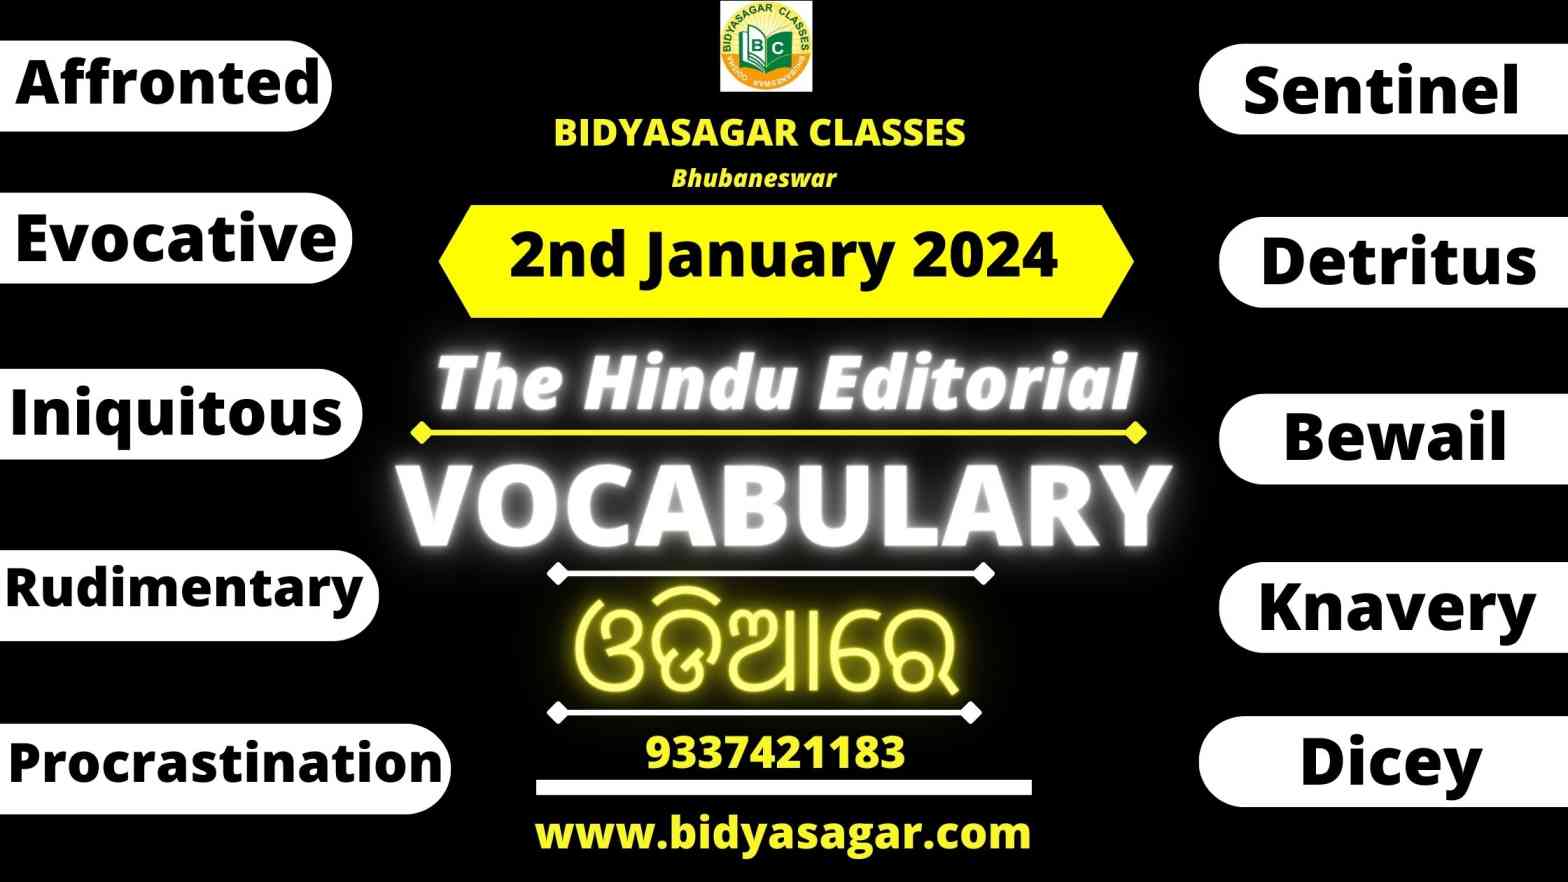 The Hindu Editorial Vocabulary of 2nd January 2024